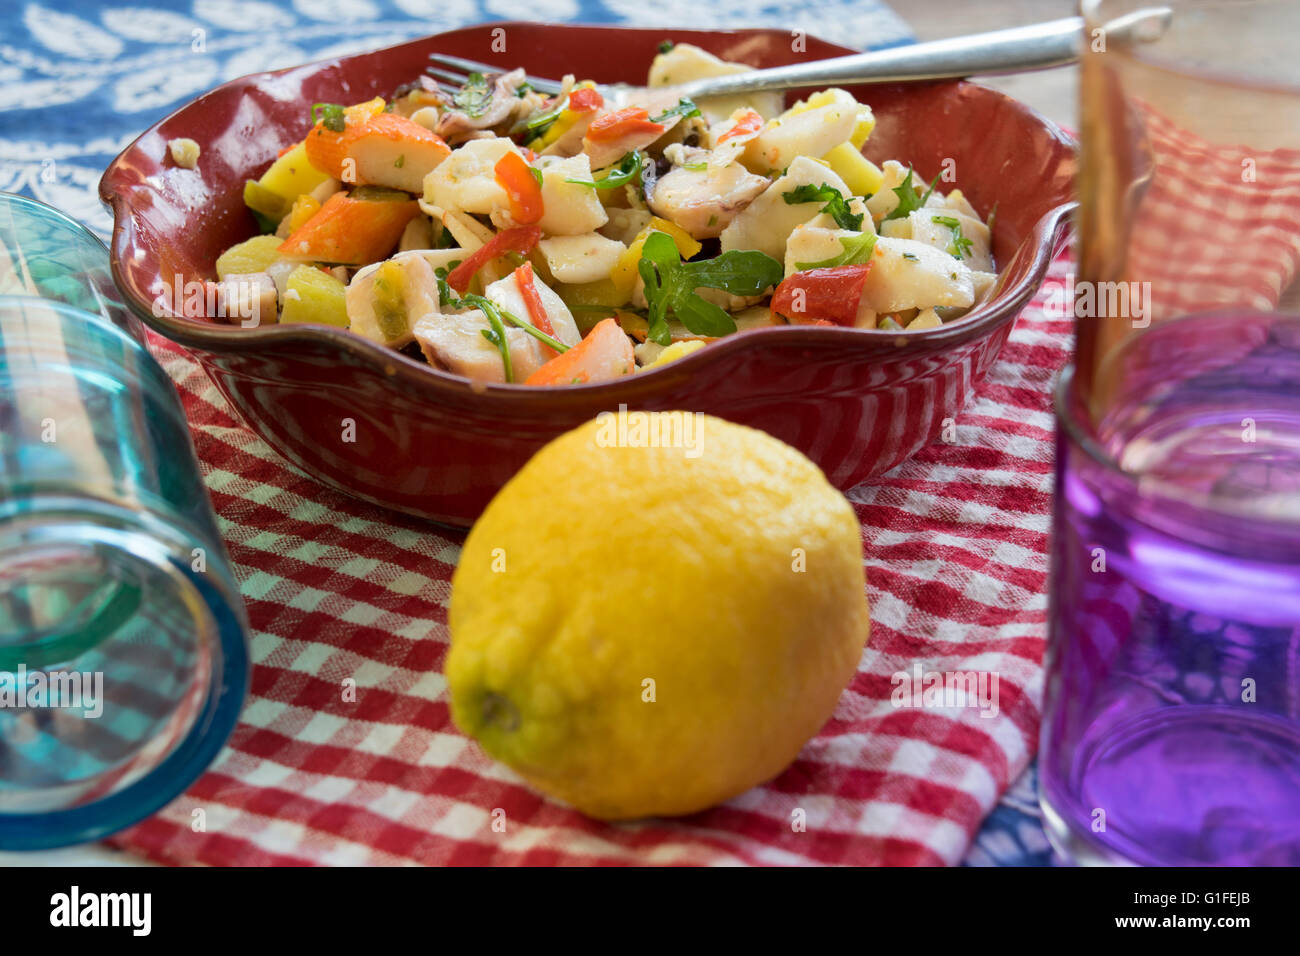 sea salad with vegetables and potatoes in a red tureen Stock Photo